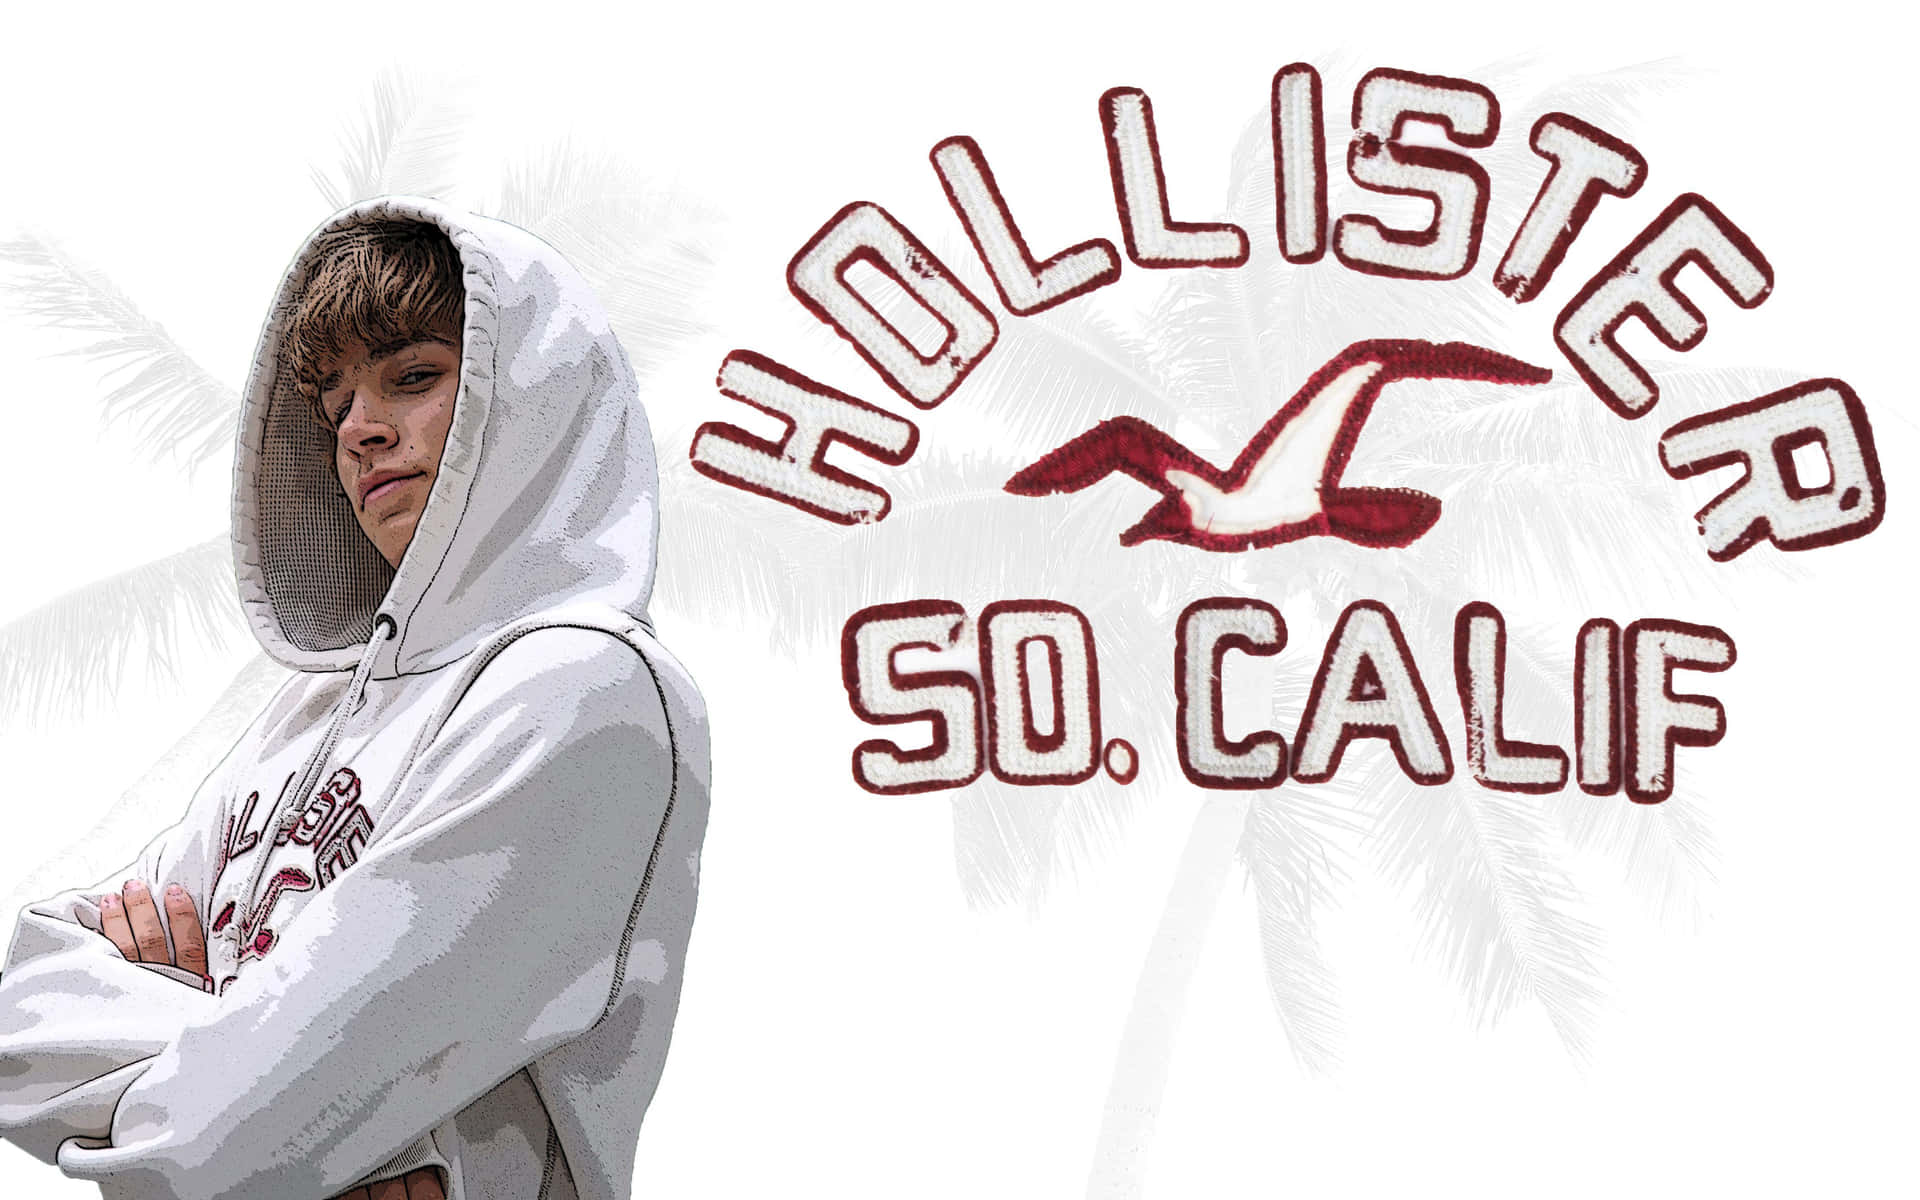 Explore the beautiful and edgy world of Hollister!